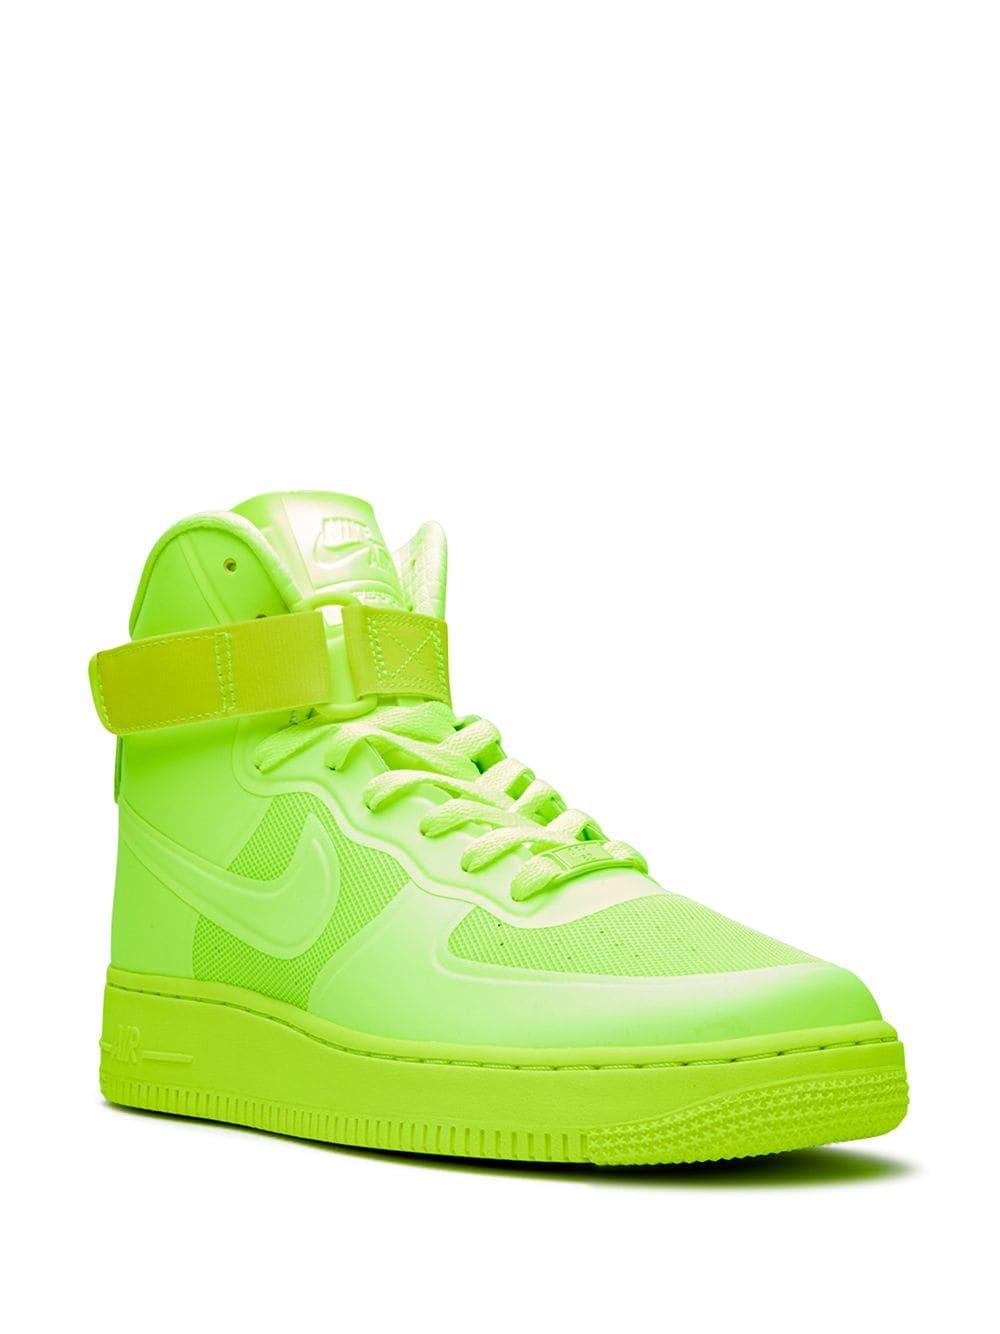 Nike Lace Air Force 1 High-top Sneakers in Green for Men - Lyst